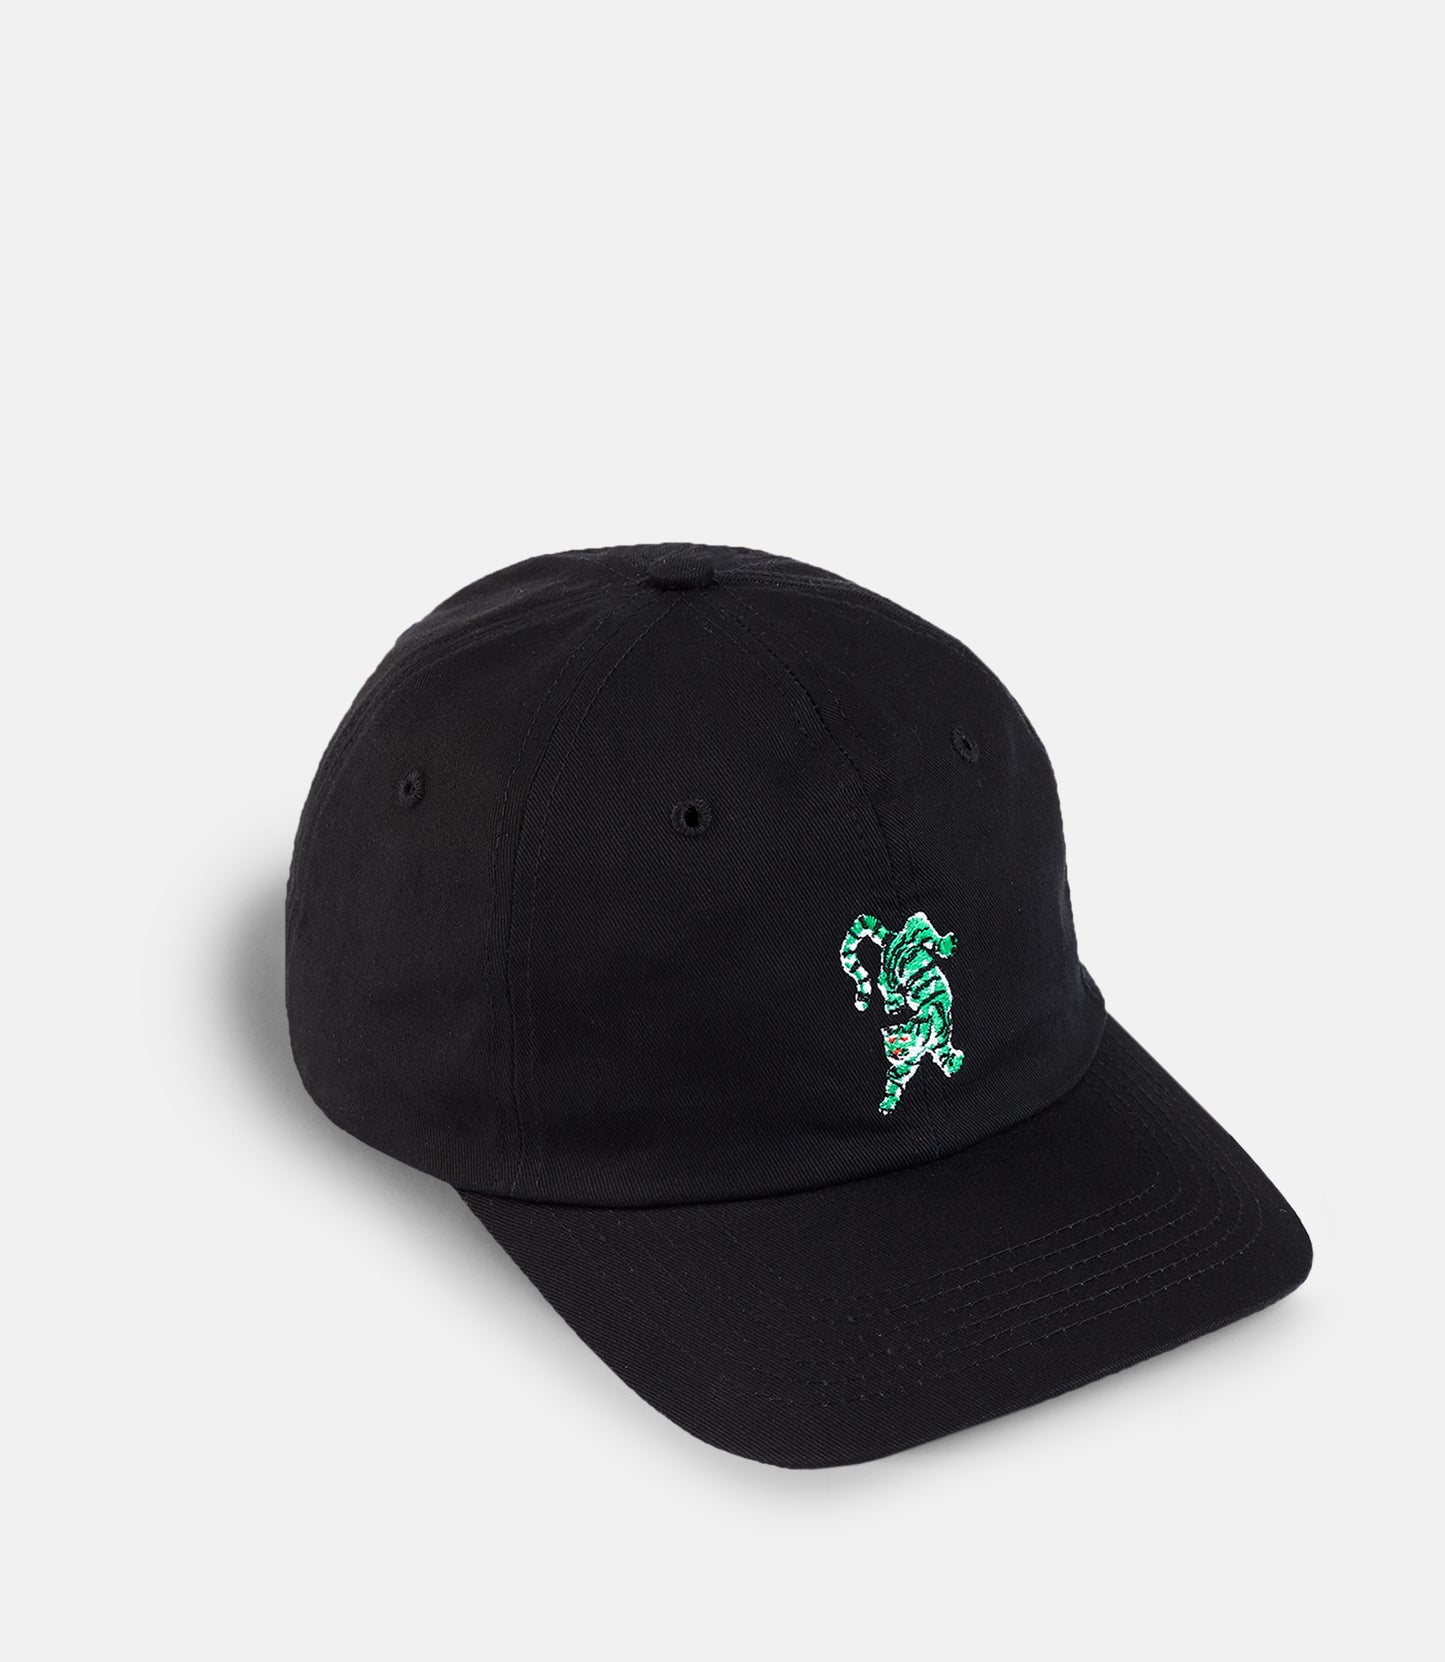 10Deep - Top Of The Chain Dad Hat, Black